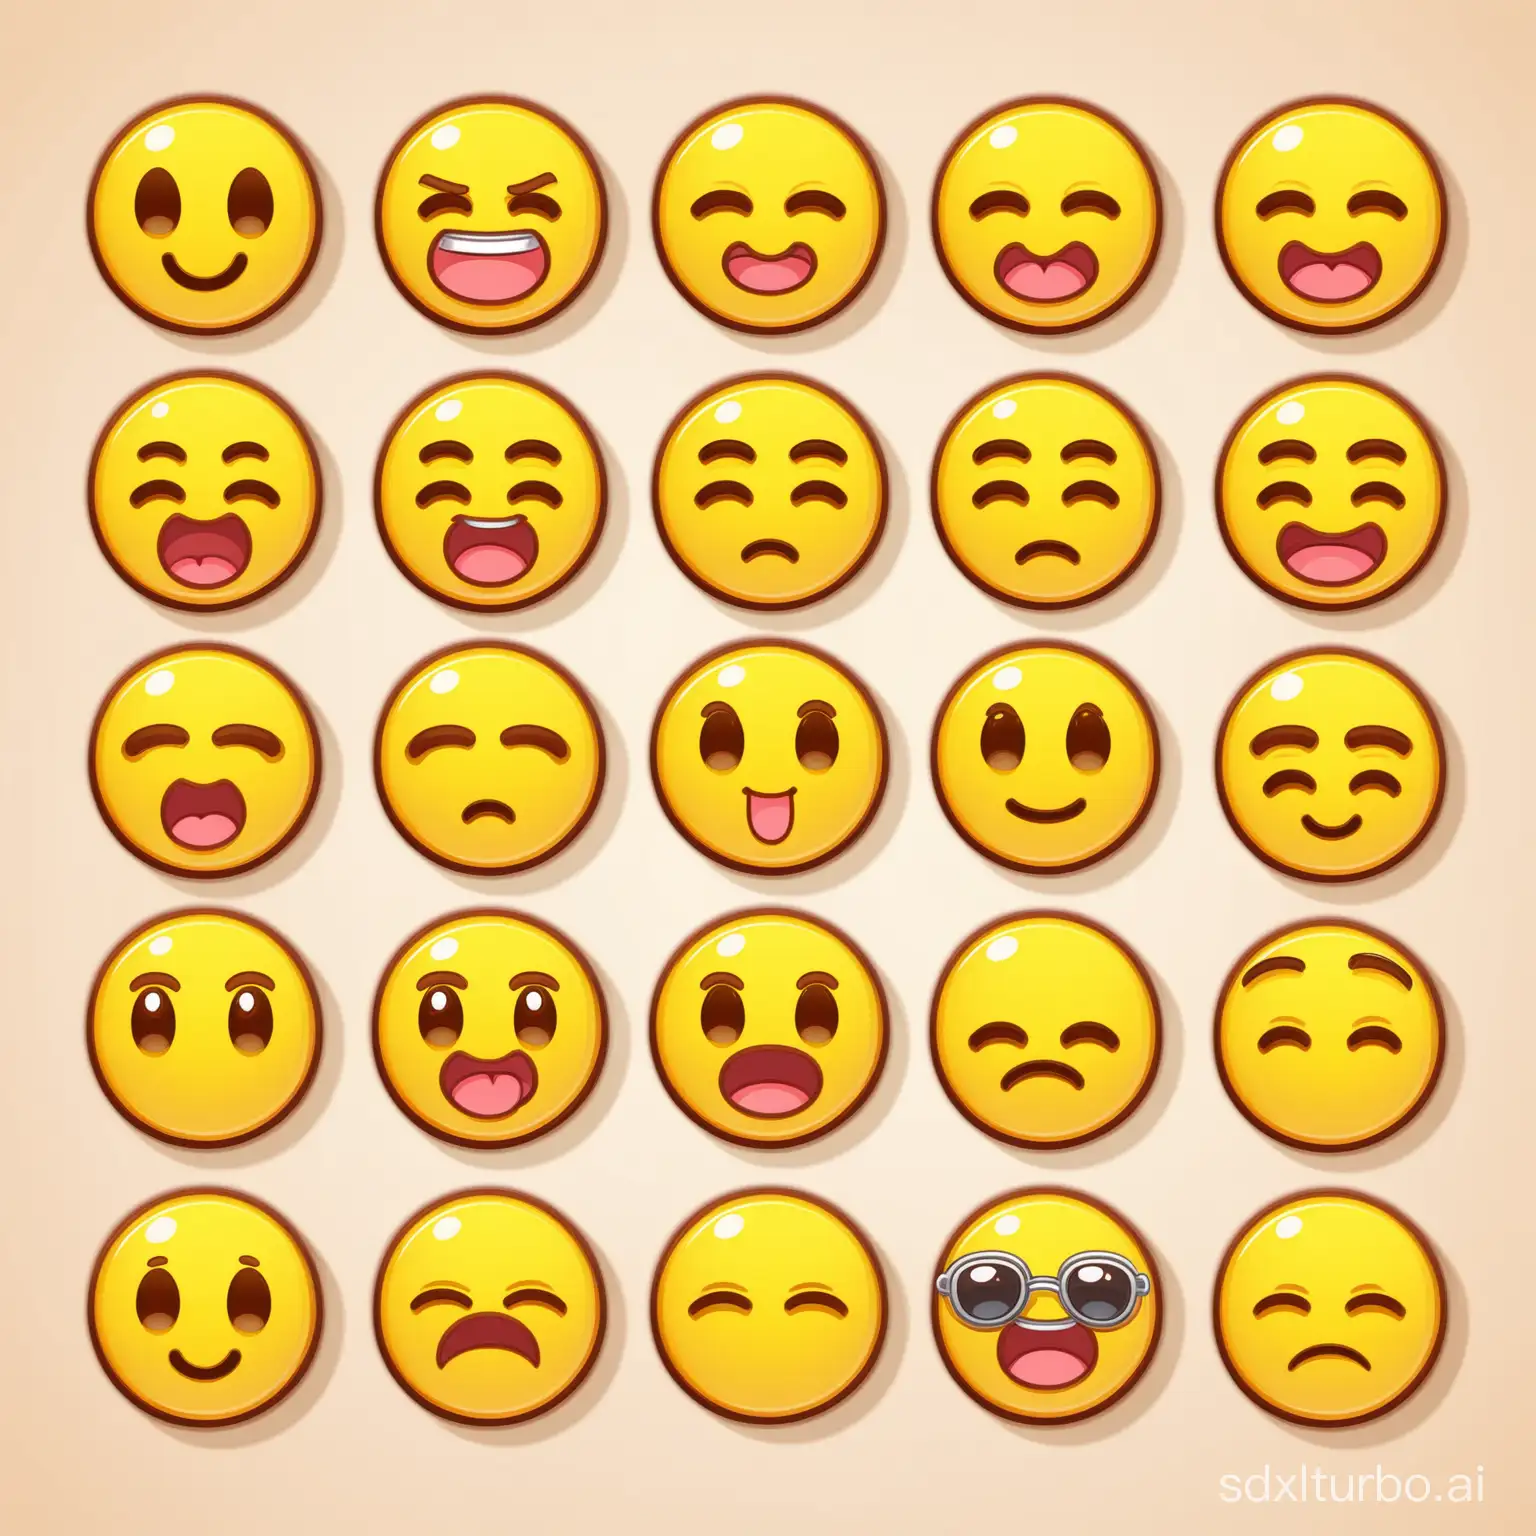 Diverse-Collection-of-Expressive-Emoticons-in-Vibrant-Colors